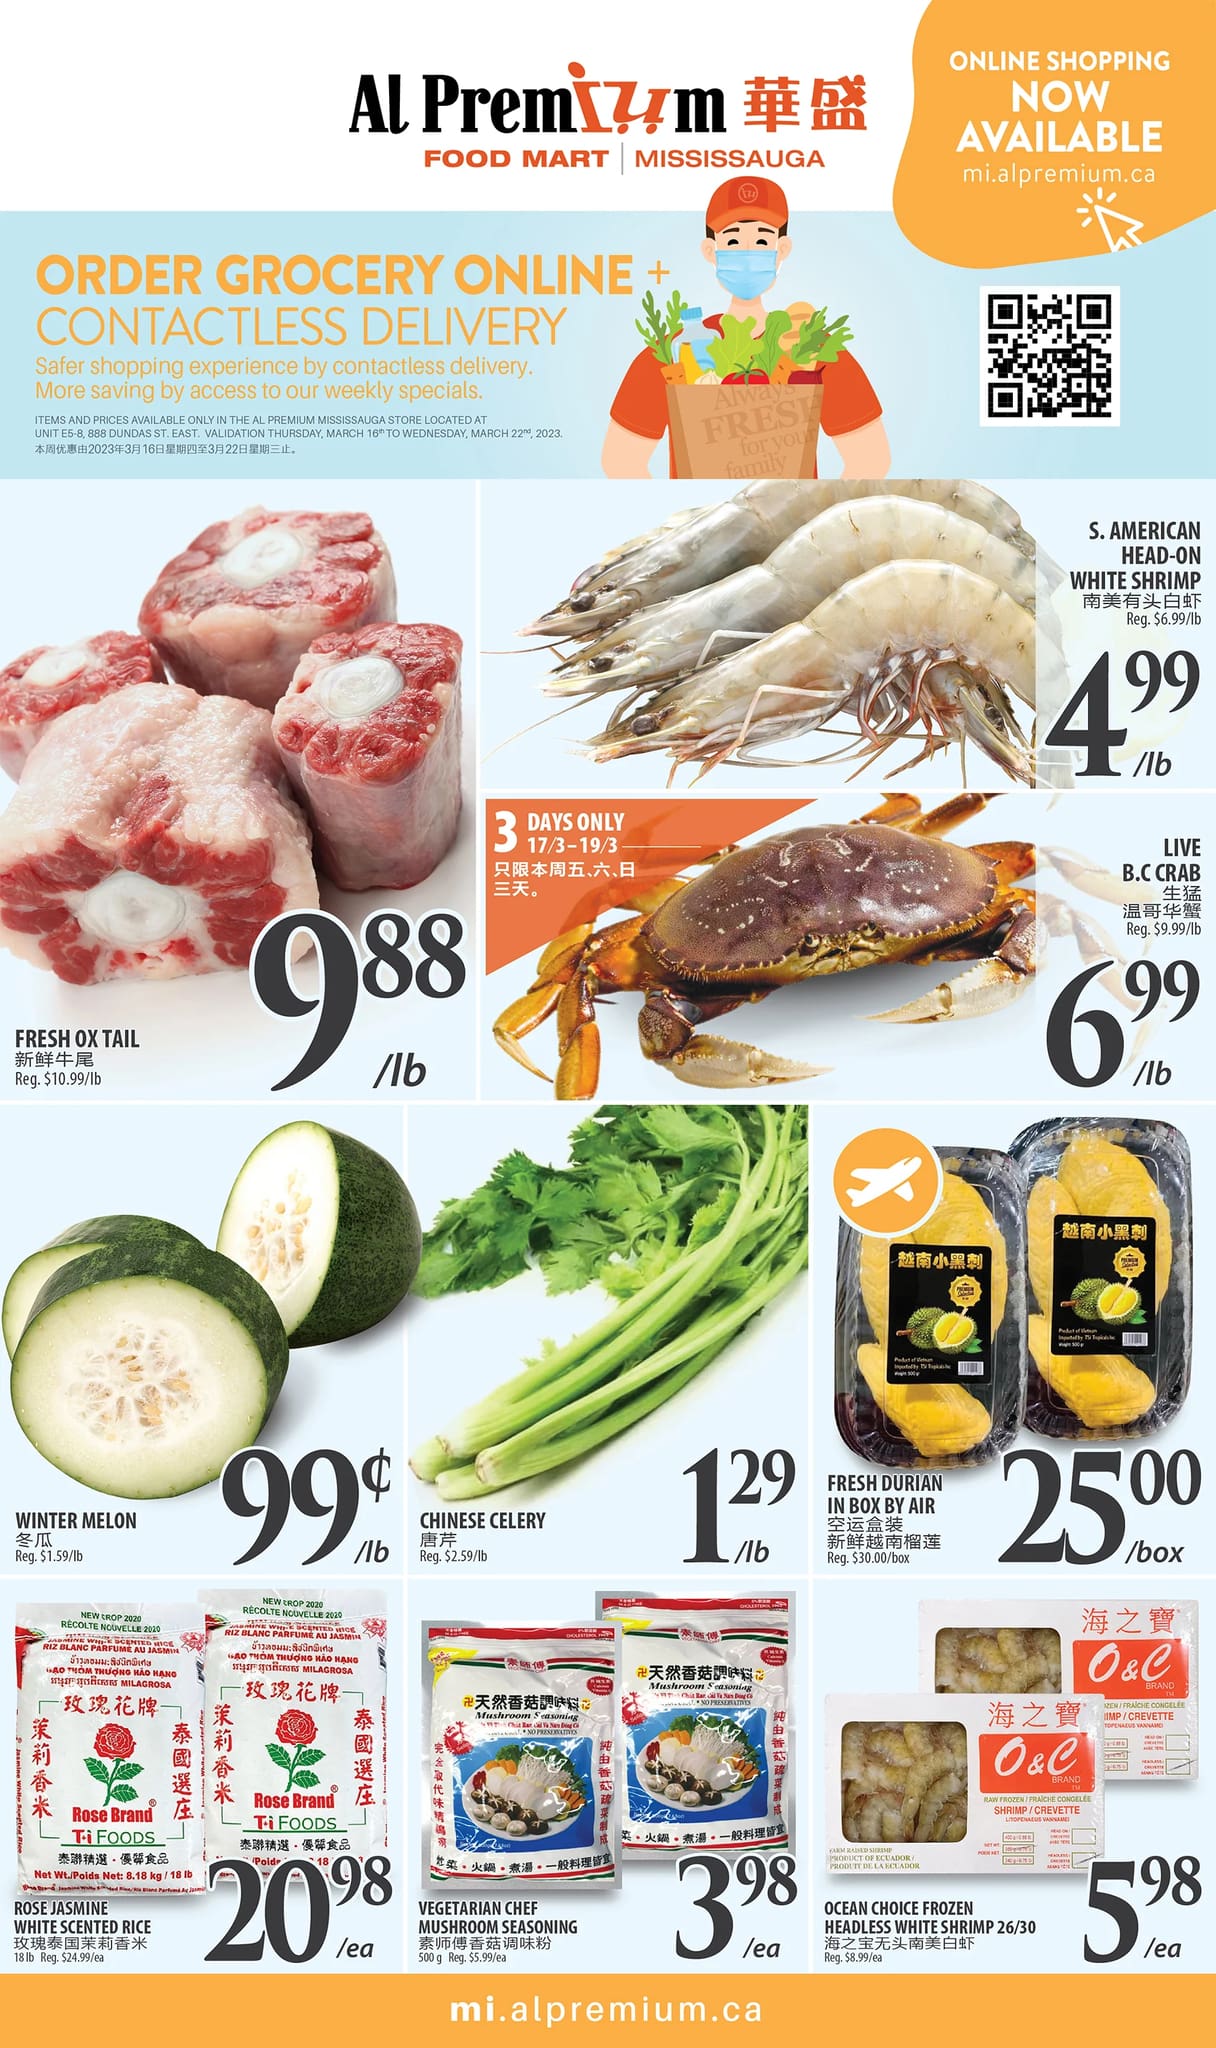 Al Premium - Mississauga Store - Weekly Flyer Specials - Page 1